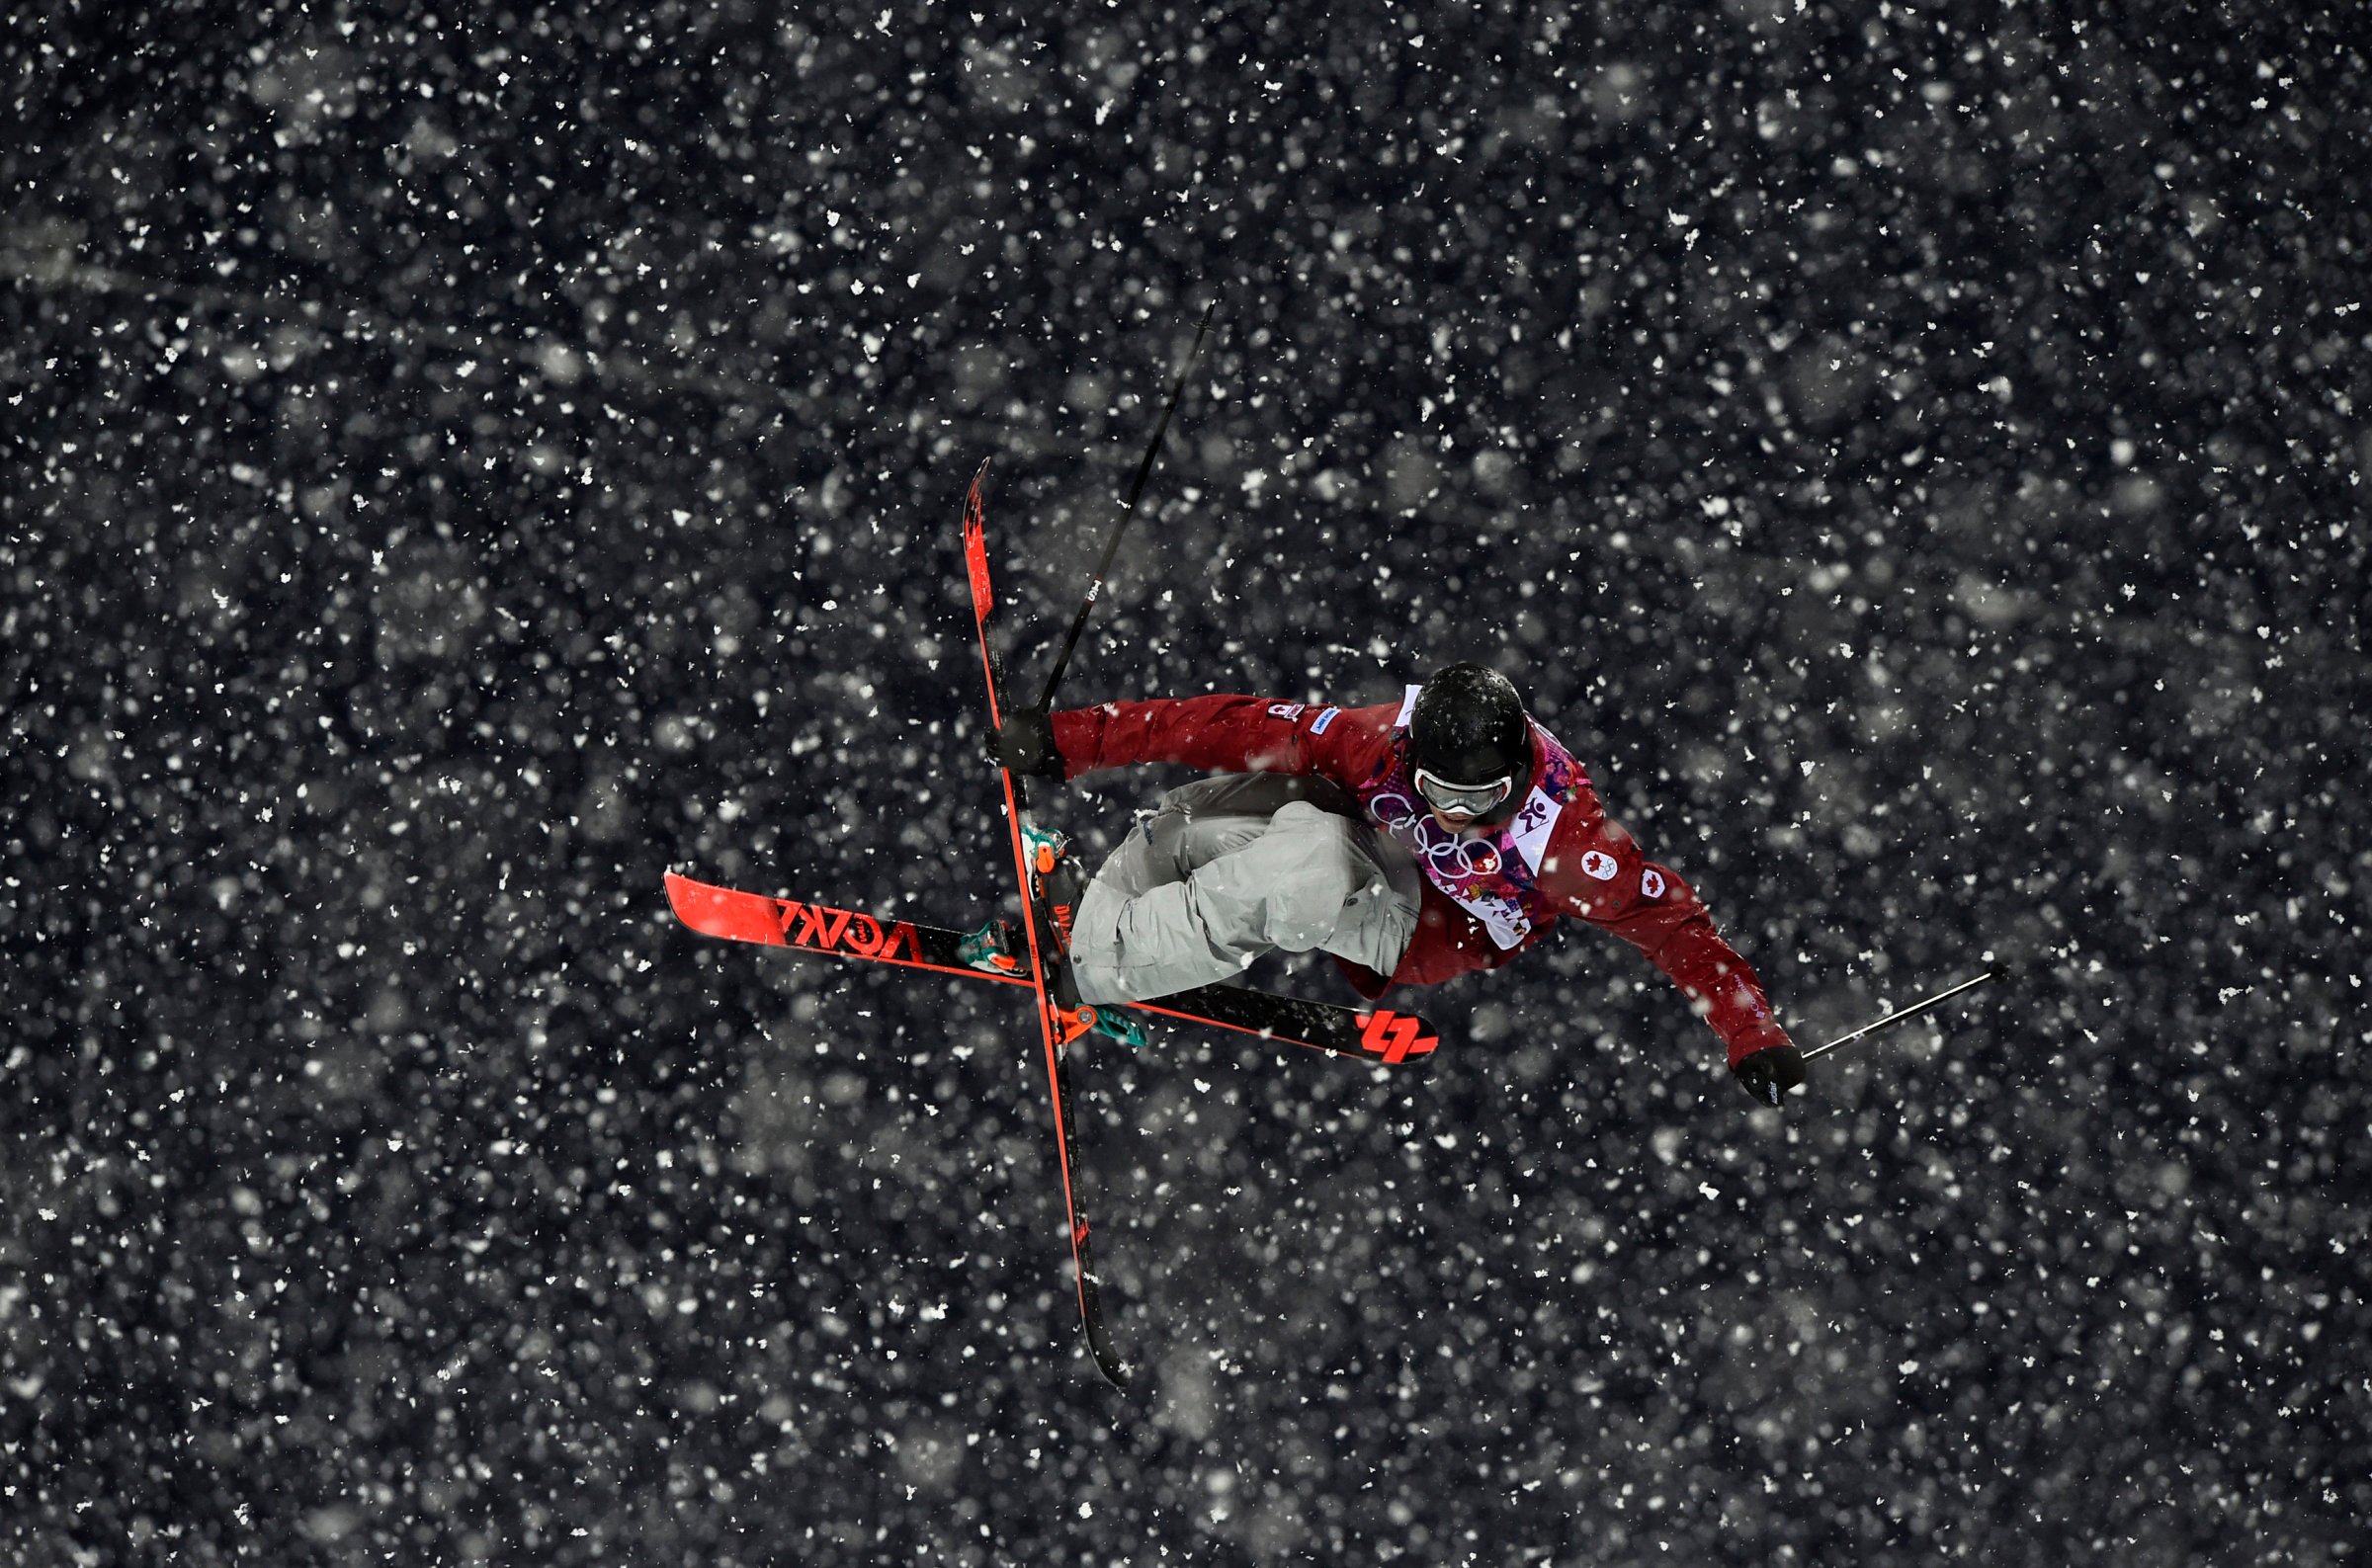 Canada's Matt Margetts competes during the men's freestyle skiing halfpipe qualification round.